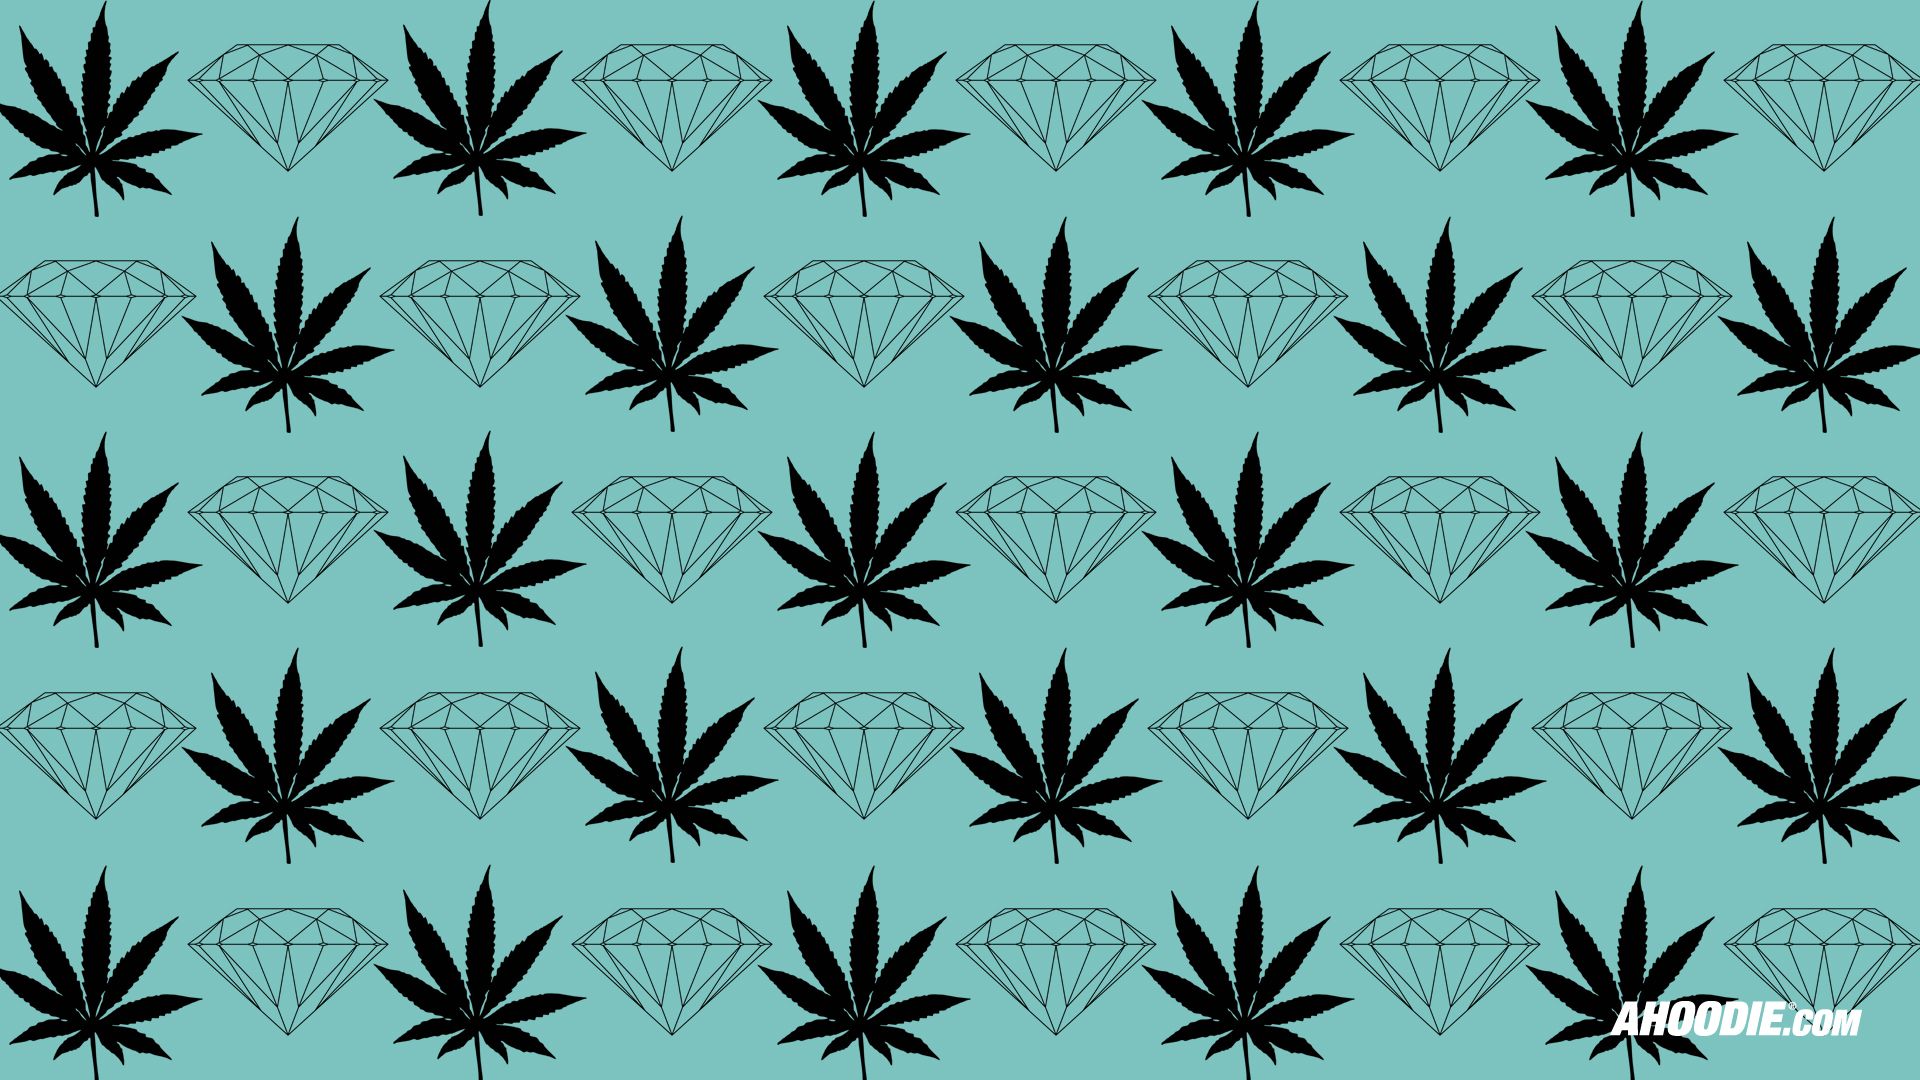 Diamond Supply Co Wallpaper Pack, by Todd Allen, August 2015